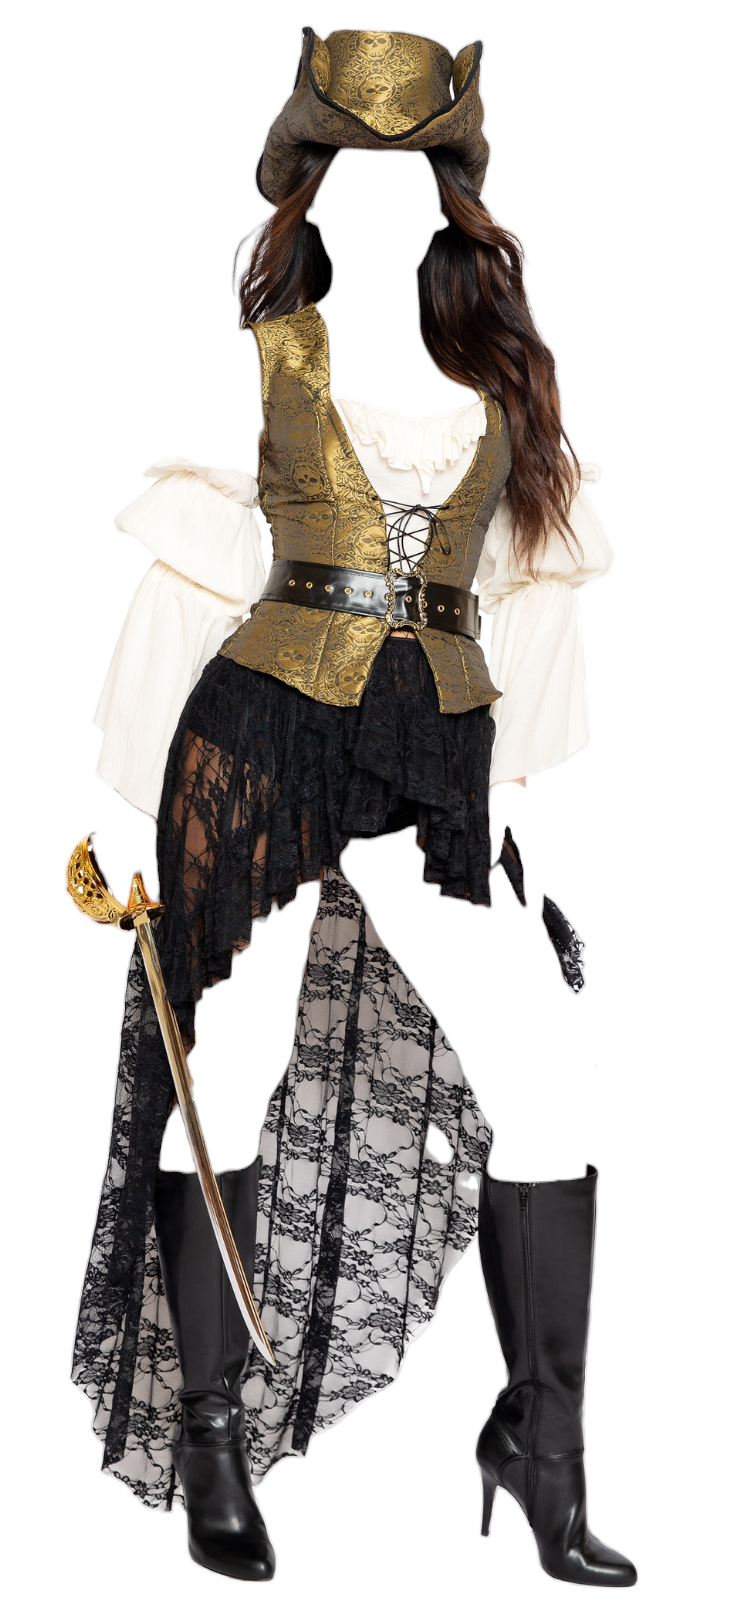 Roma Costume 6 PC Pirate Queen Top with Vest & Lace Skirt Costume Set Gold/Black